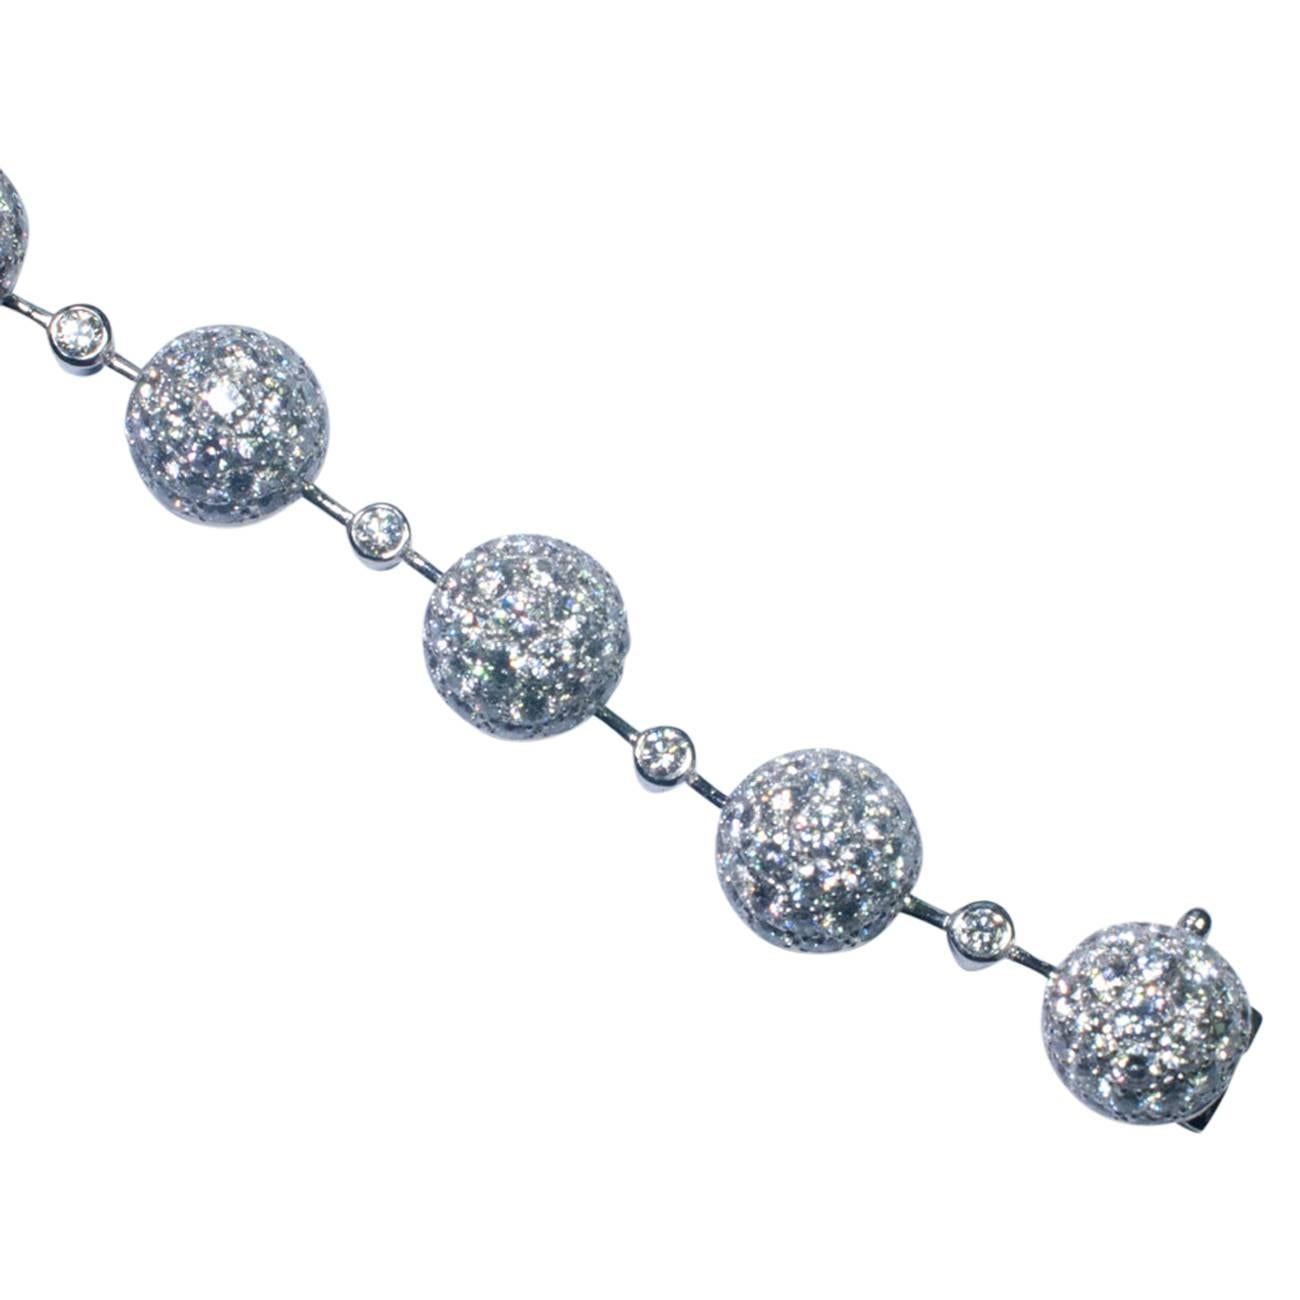 The bracelet is formed of 12 brilliant cut, pavé set diamond spheres linked on a knife blade, with a bezel set, brilliant cut diamond between each sphere.  Total diamond weight, 8cts.  Length 19cms, stamped 750 and signed Chatila.  This family owned